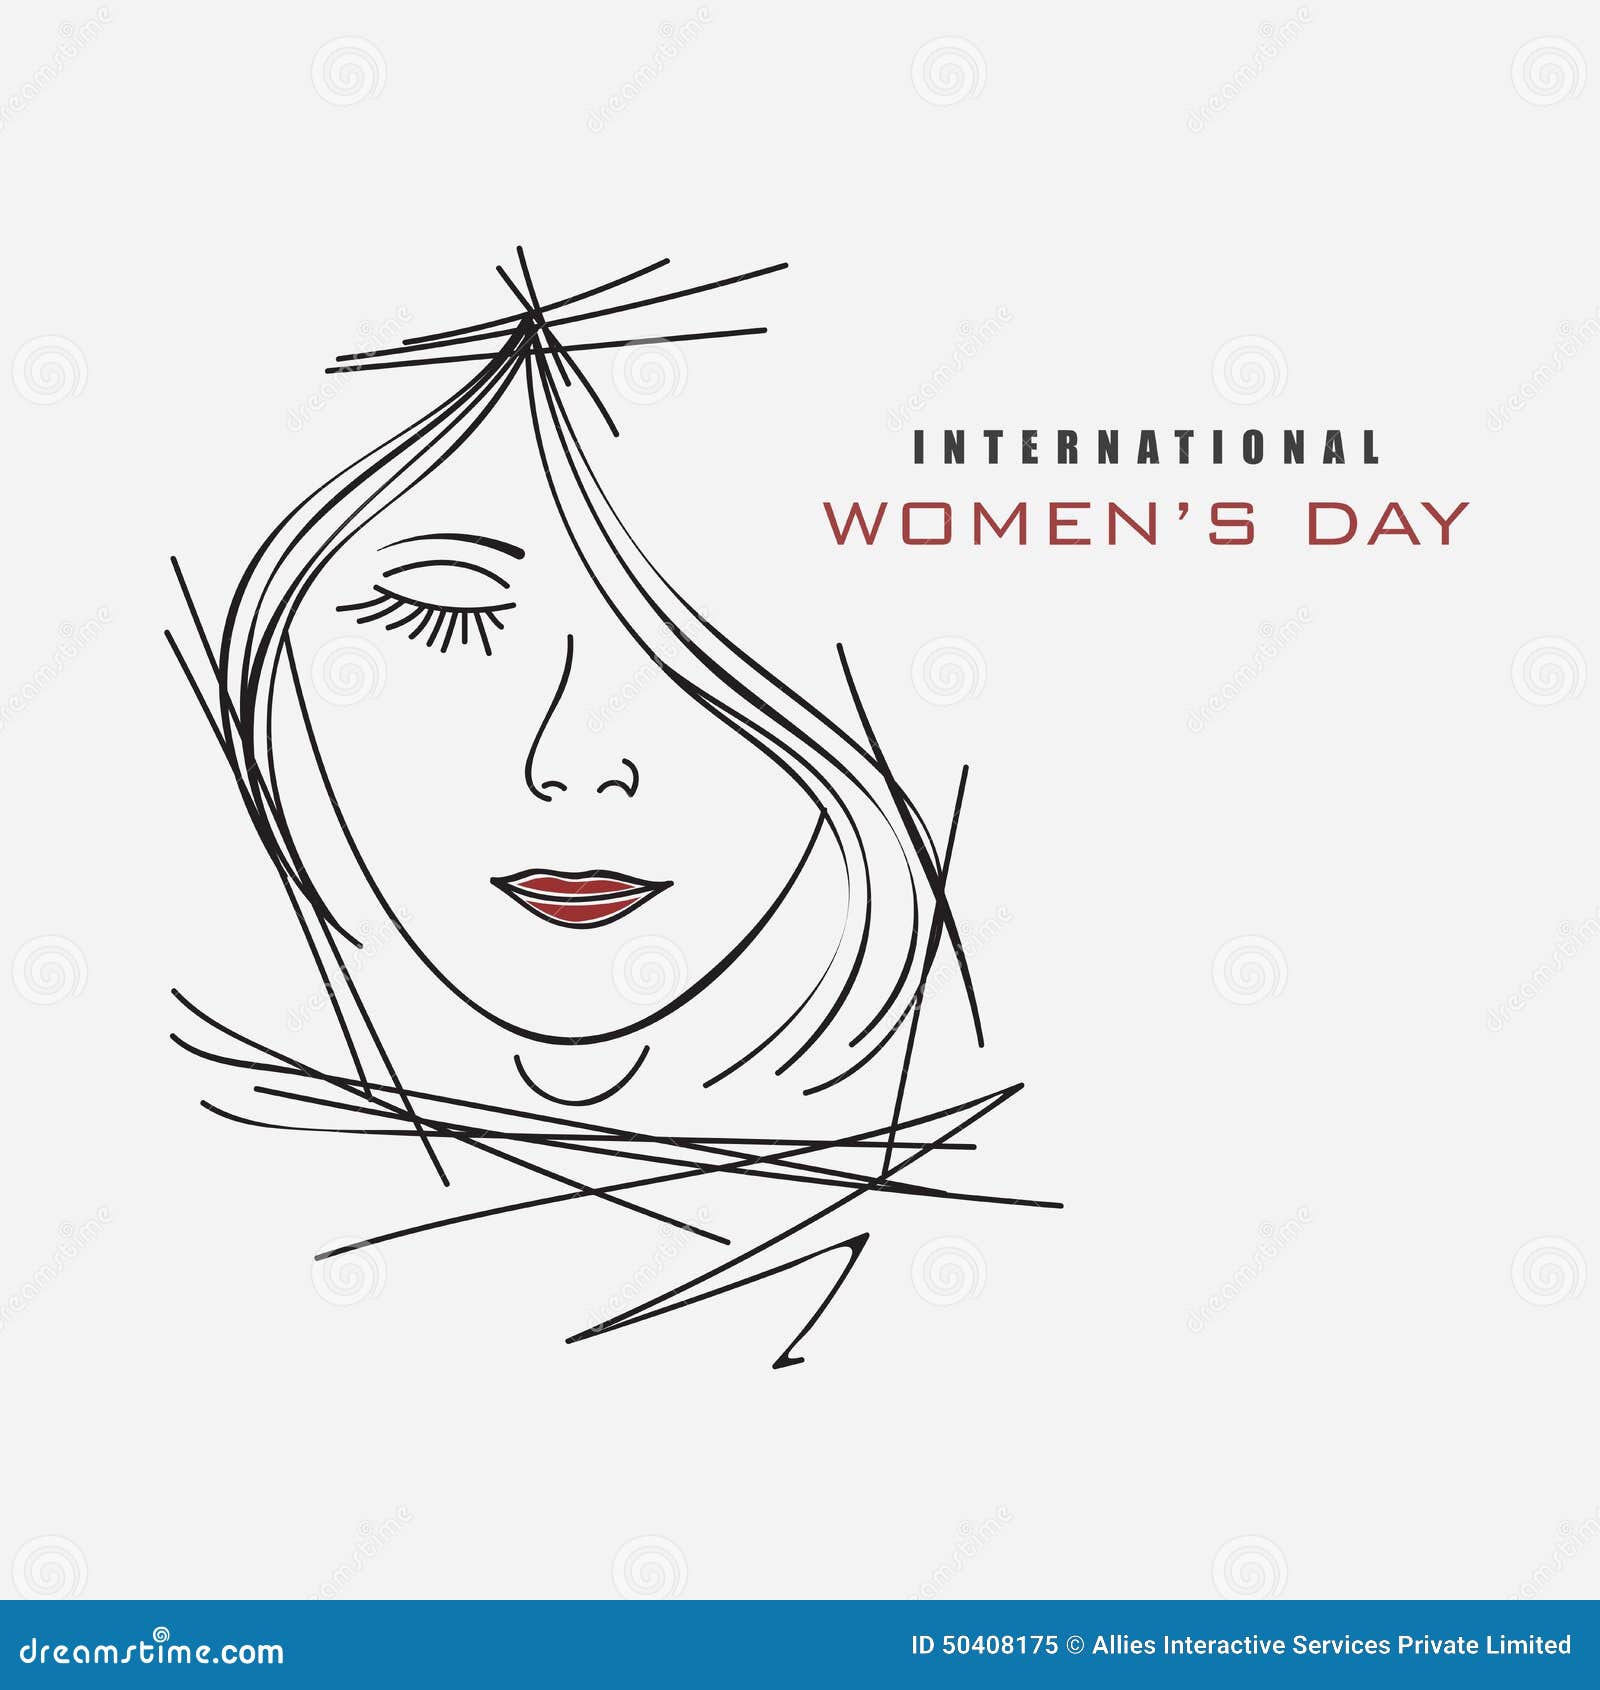 International Women's Day Drawing || How to Draw World Women's Day Poster  Easy step by step - YouTube